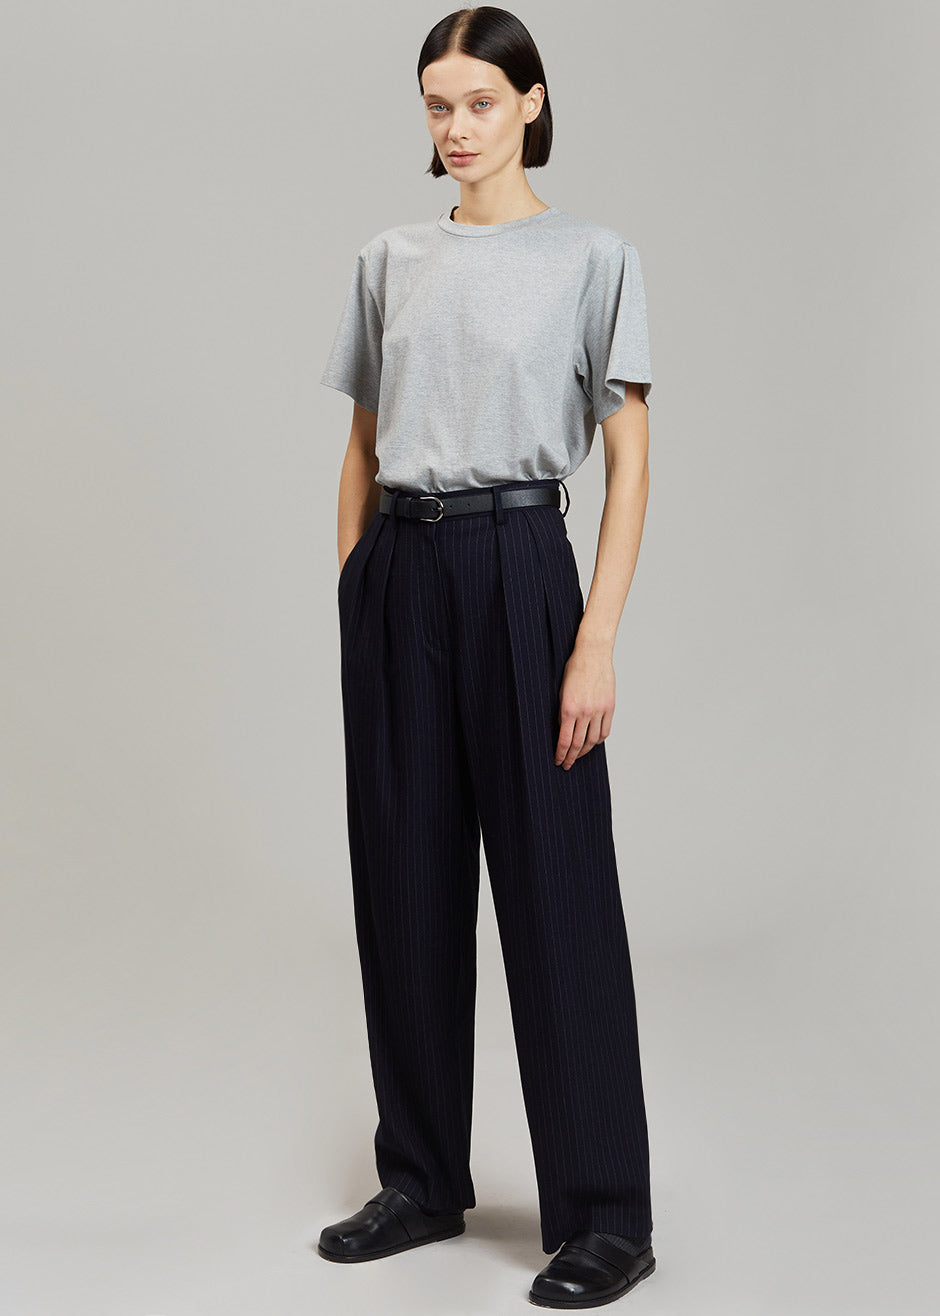 Tansy Pleated Trousers - Navy Pinstripe - 5